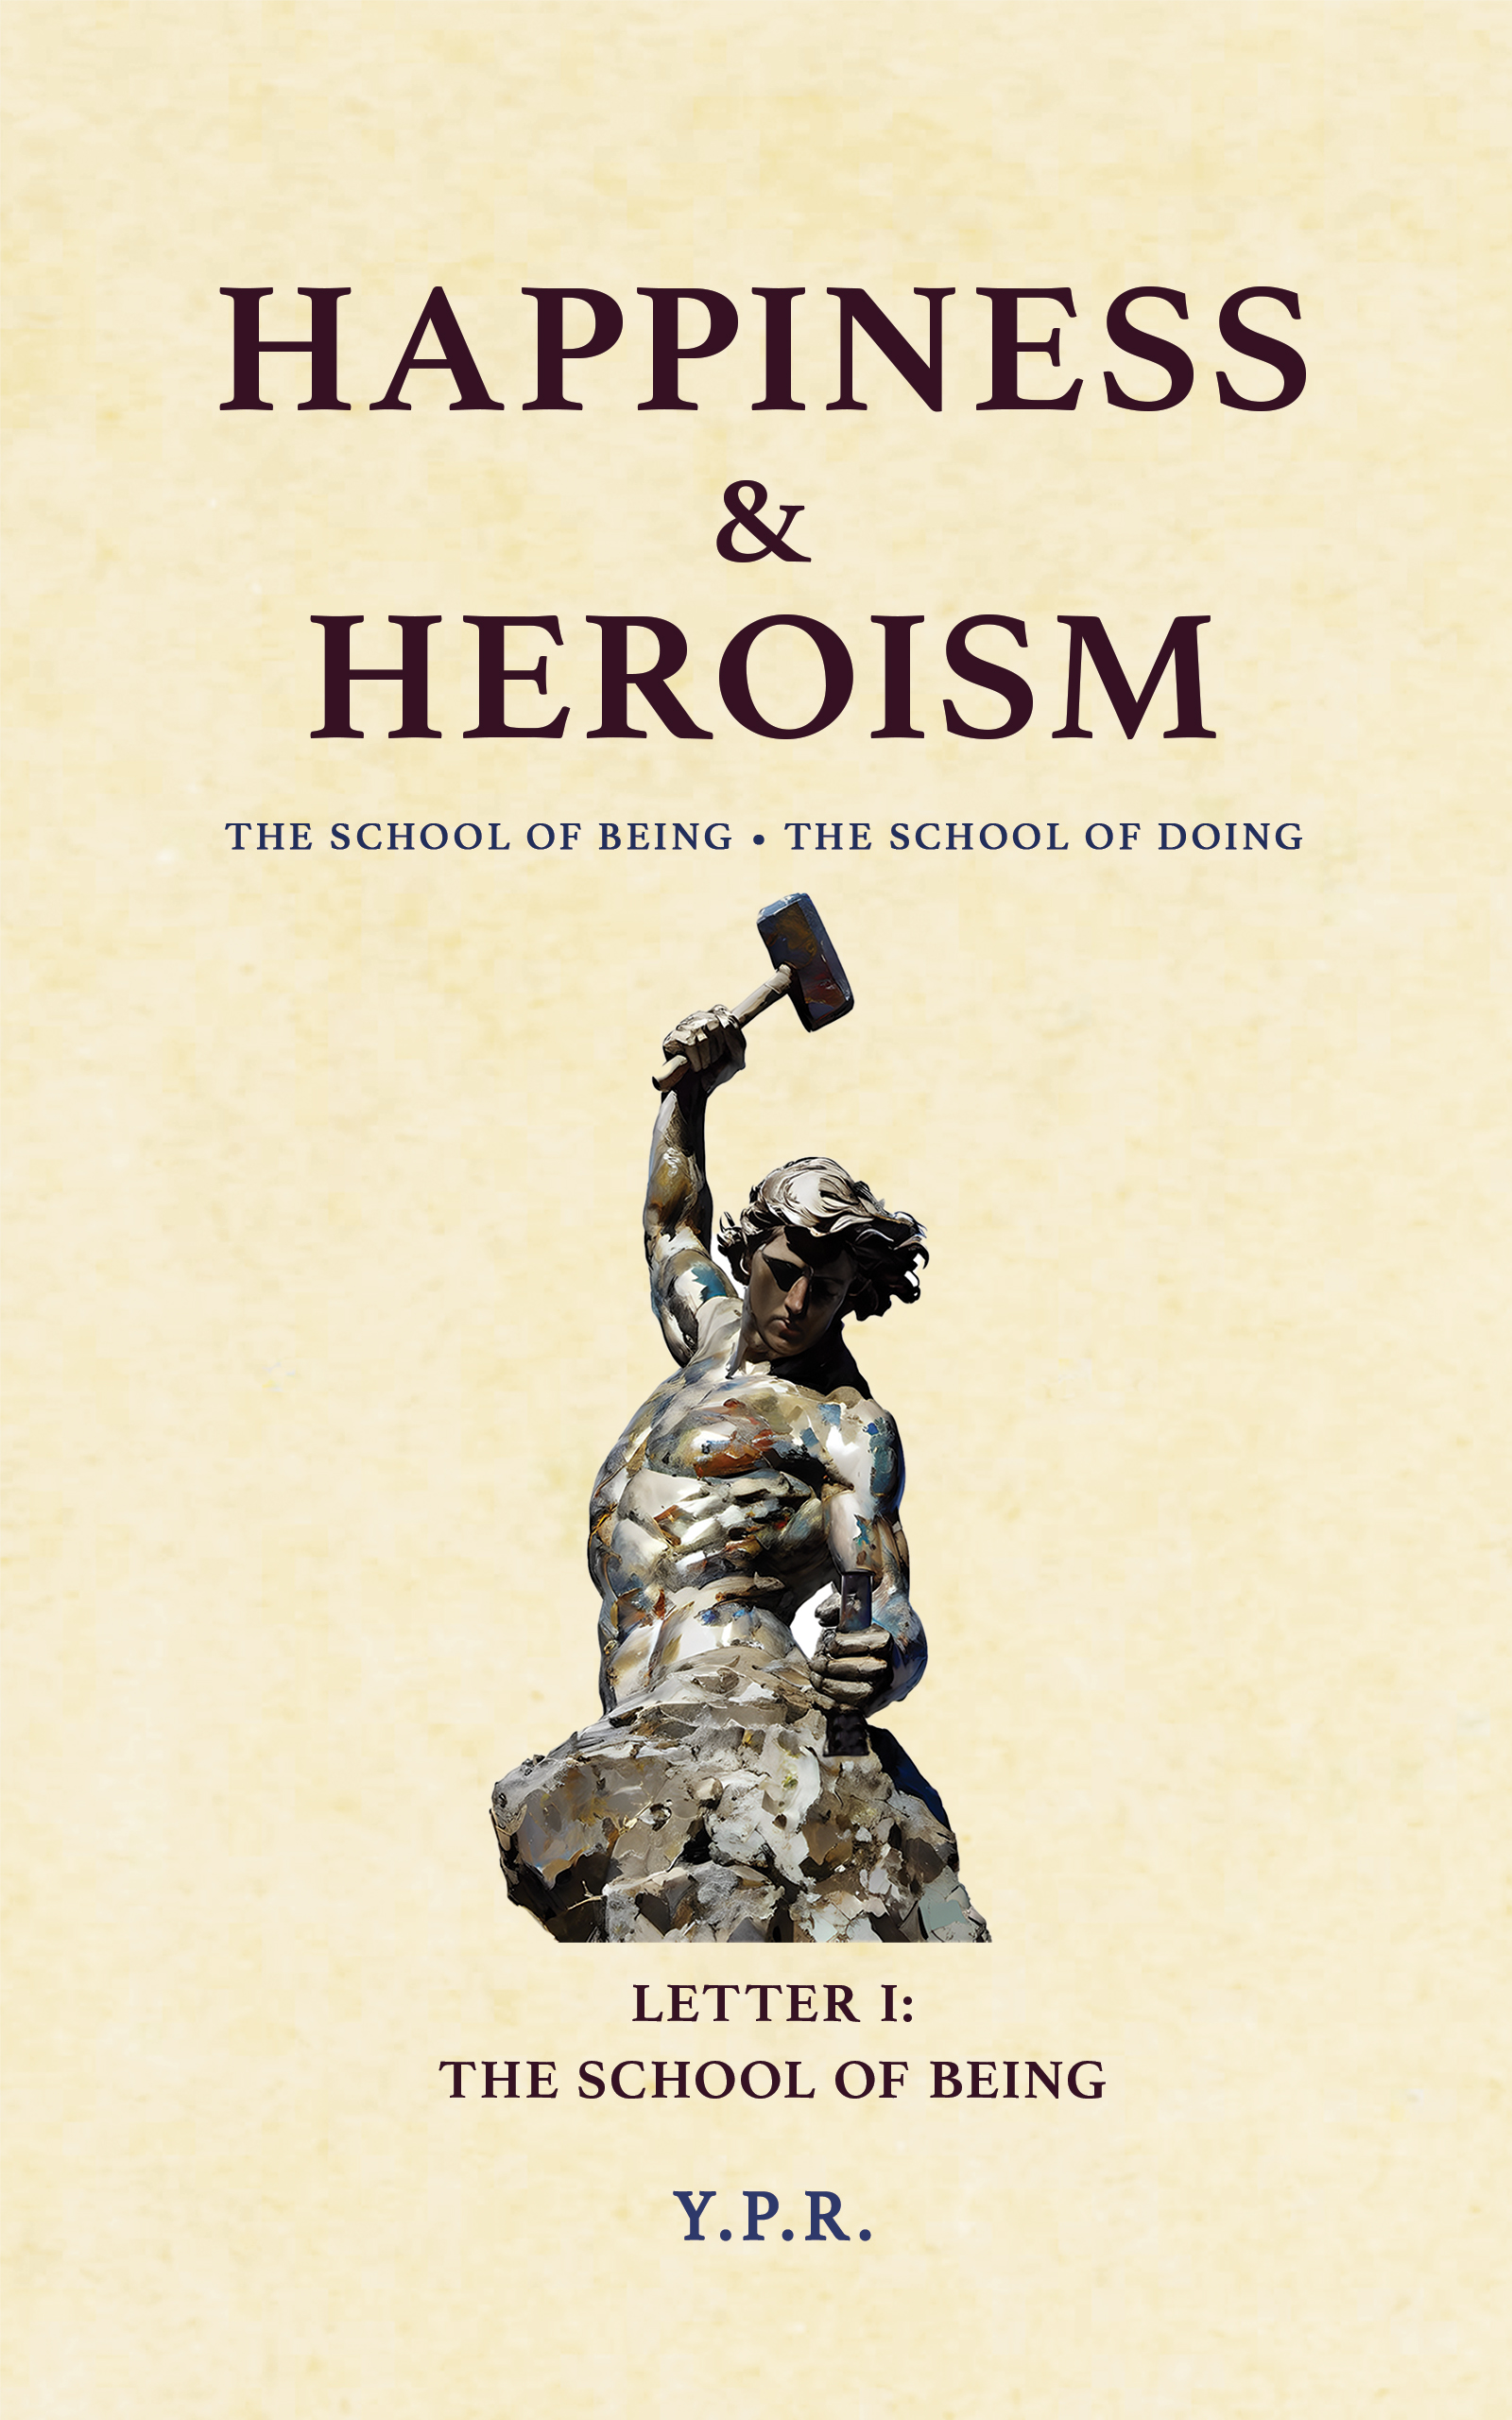 Happiness and Heroism by Y.P.R.